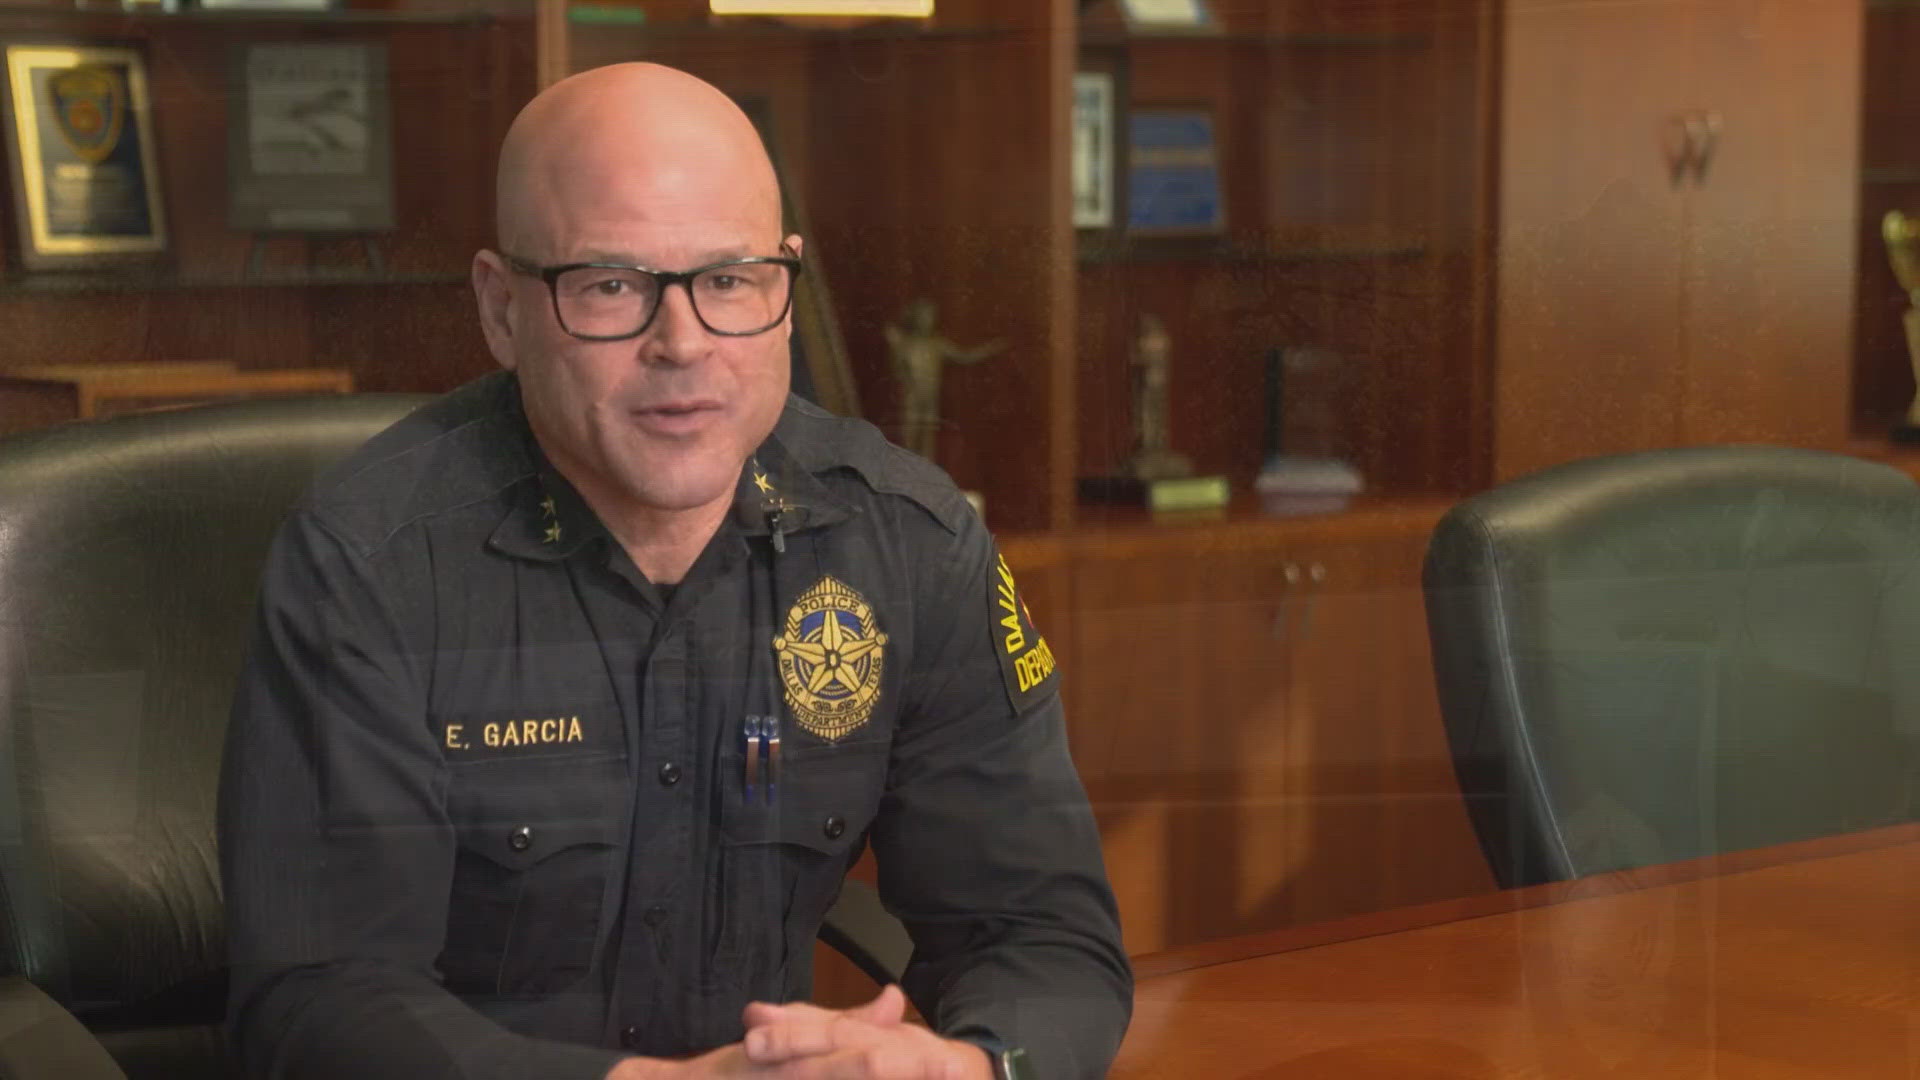 Dallas Police Chief Eddie Garcia is in high demand and could leave for another city in Texas.